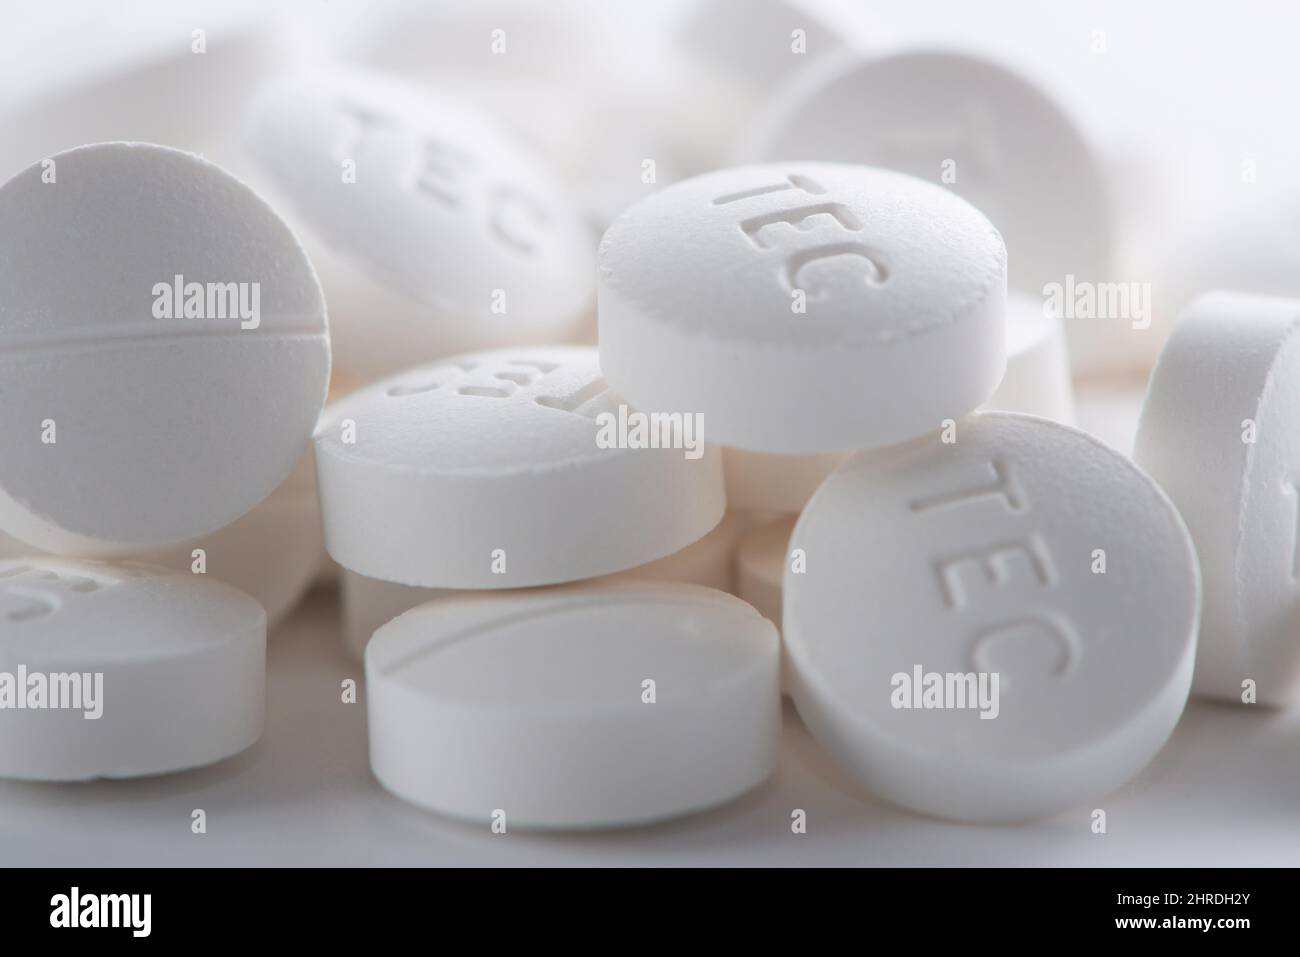 Prescription pills containing oxycodone and acetaminophen are shown in Toronto, Nov. 5, 2017. The overall number of prescriptions for opioids has increased over the last five years, but doctors have been giving patients fewer doses at one time, a report by the Canadian Institute for Health Information has found.THE CANADIAN PRESS/Graeme Roy Stock Photo